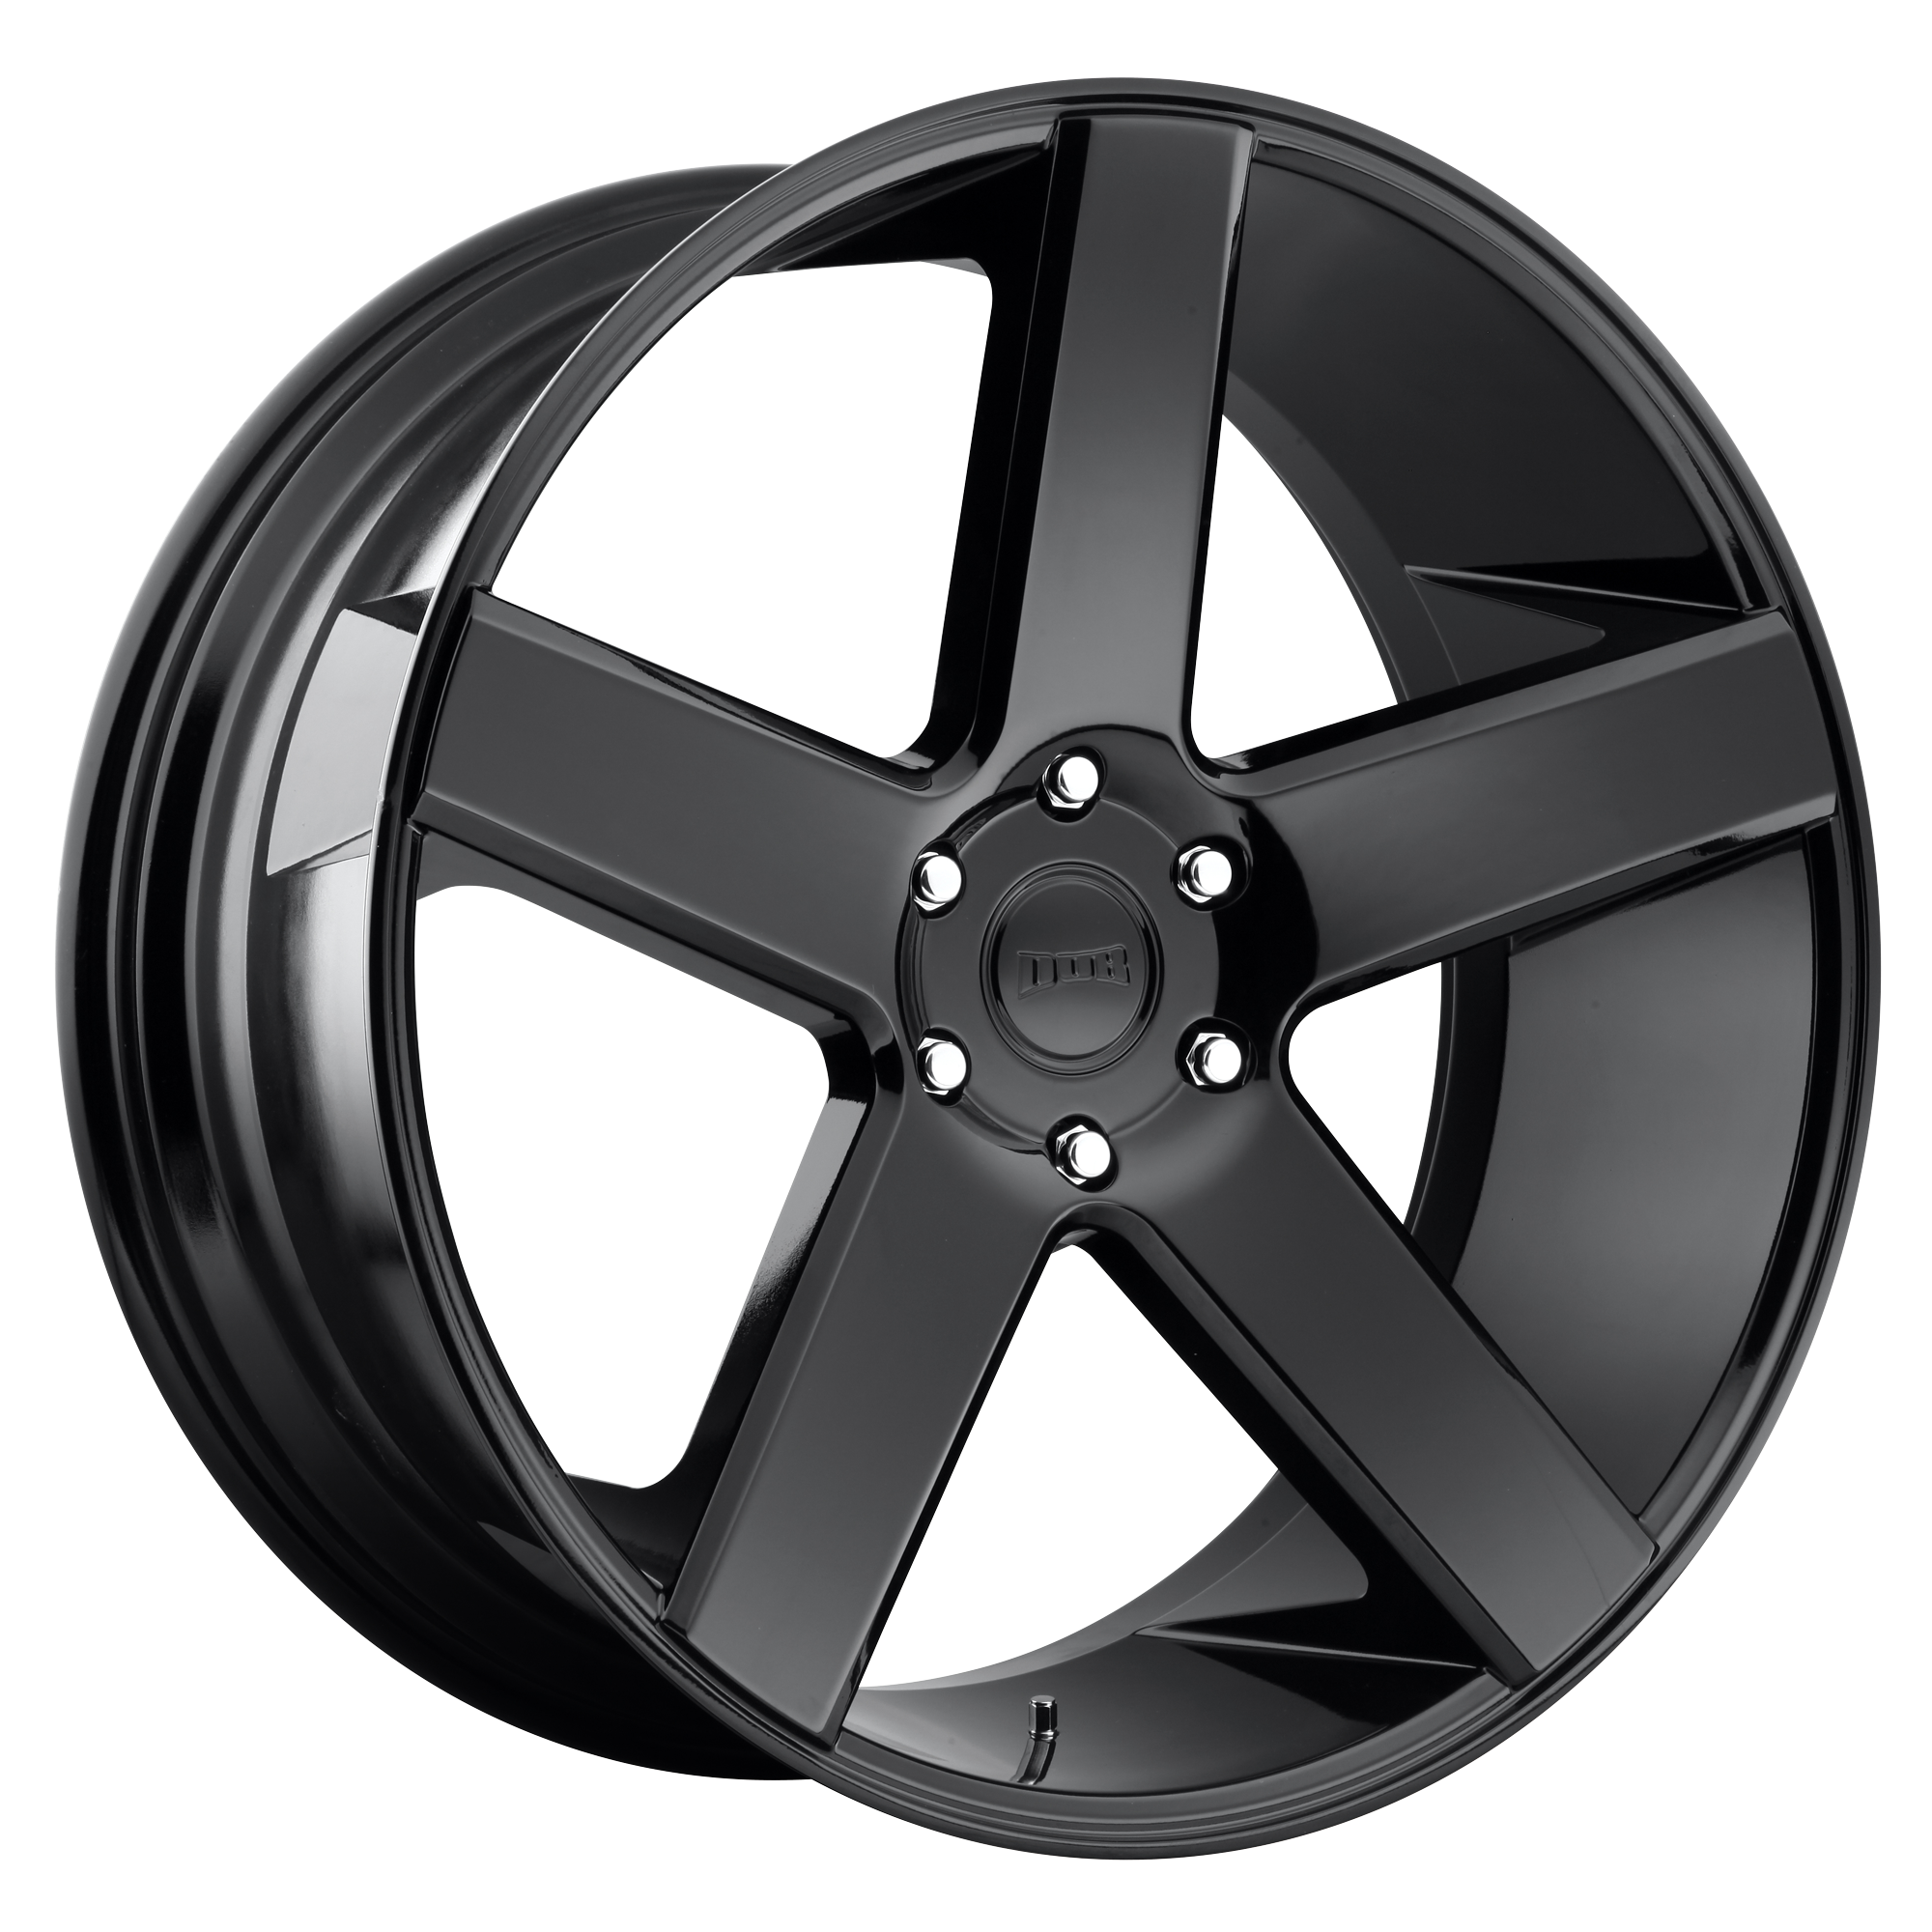 BALLER 22x10.5 5x120.00 GLOSS BLACK (20 mm) - Tires and Engine Performance